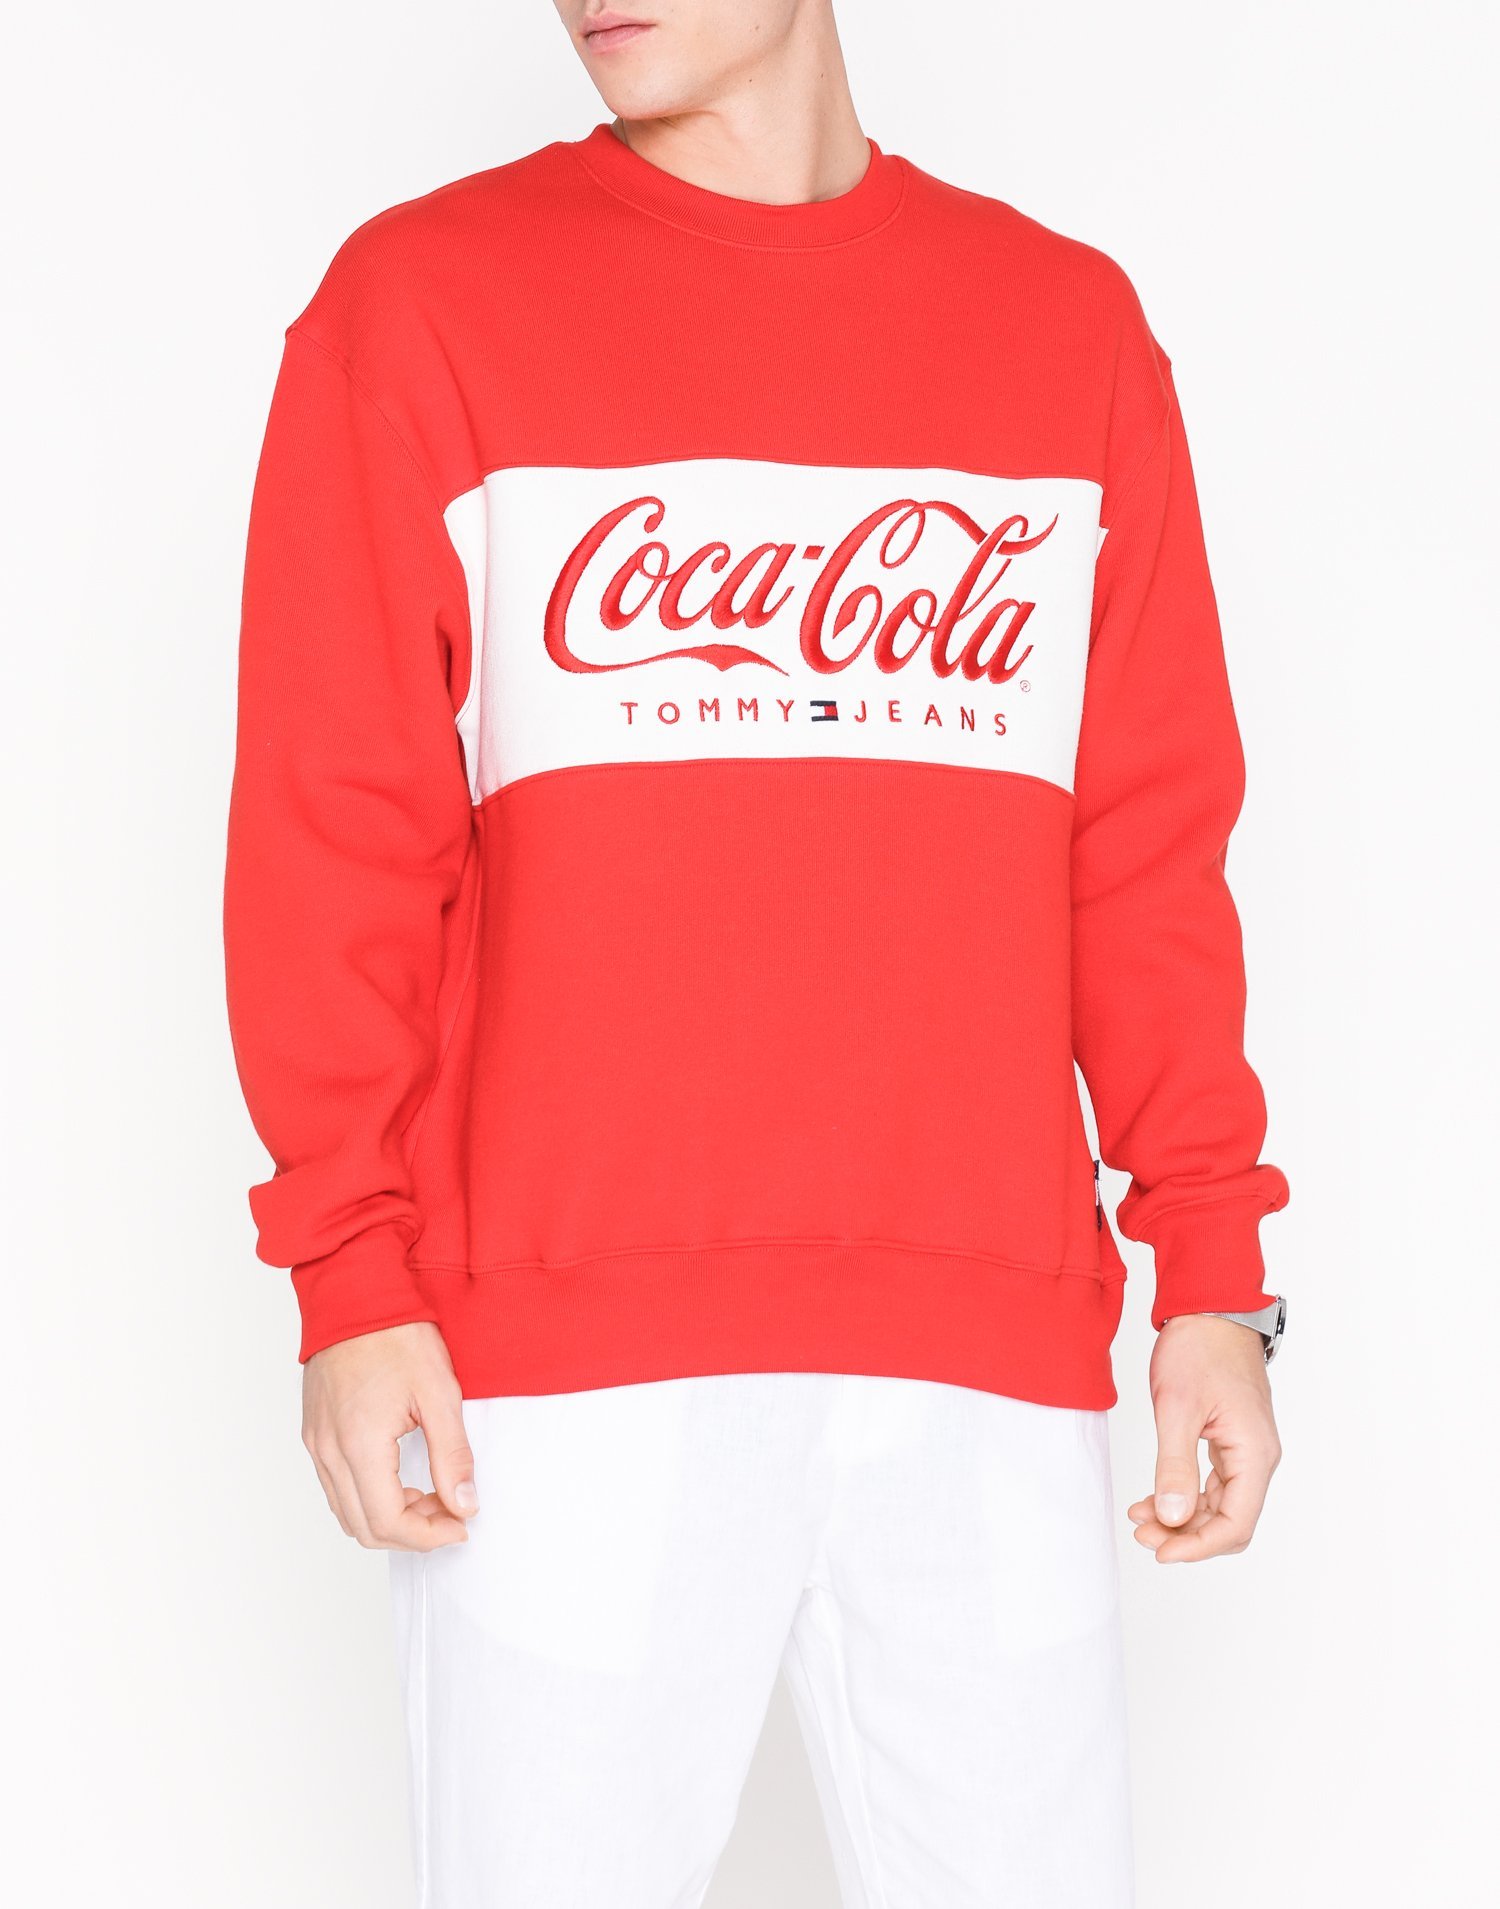 Tommy X Coca Cola Sweat - Tommy Jeans - Coca Cola Classic - Jumpers ...